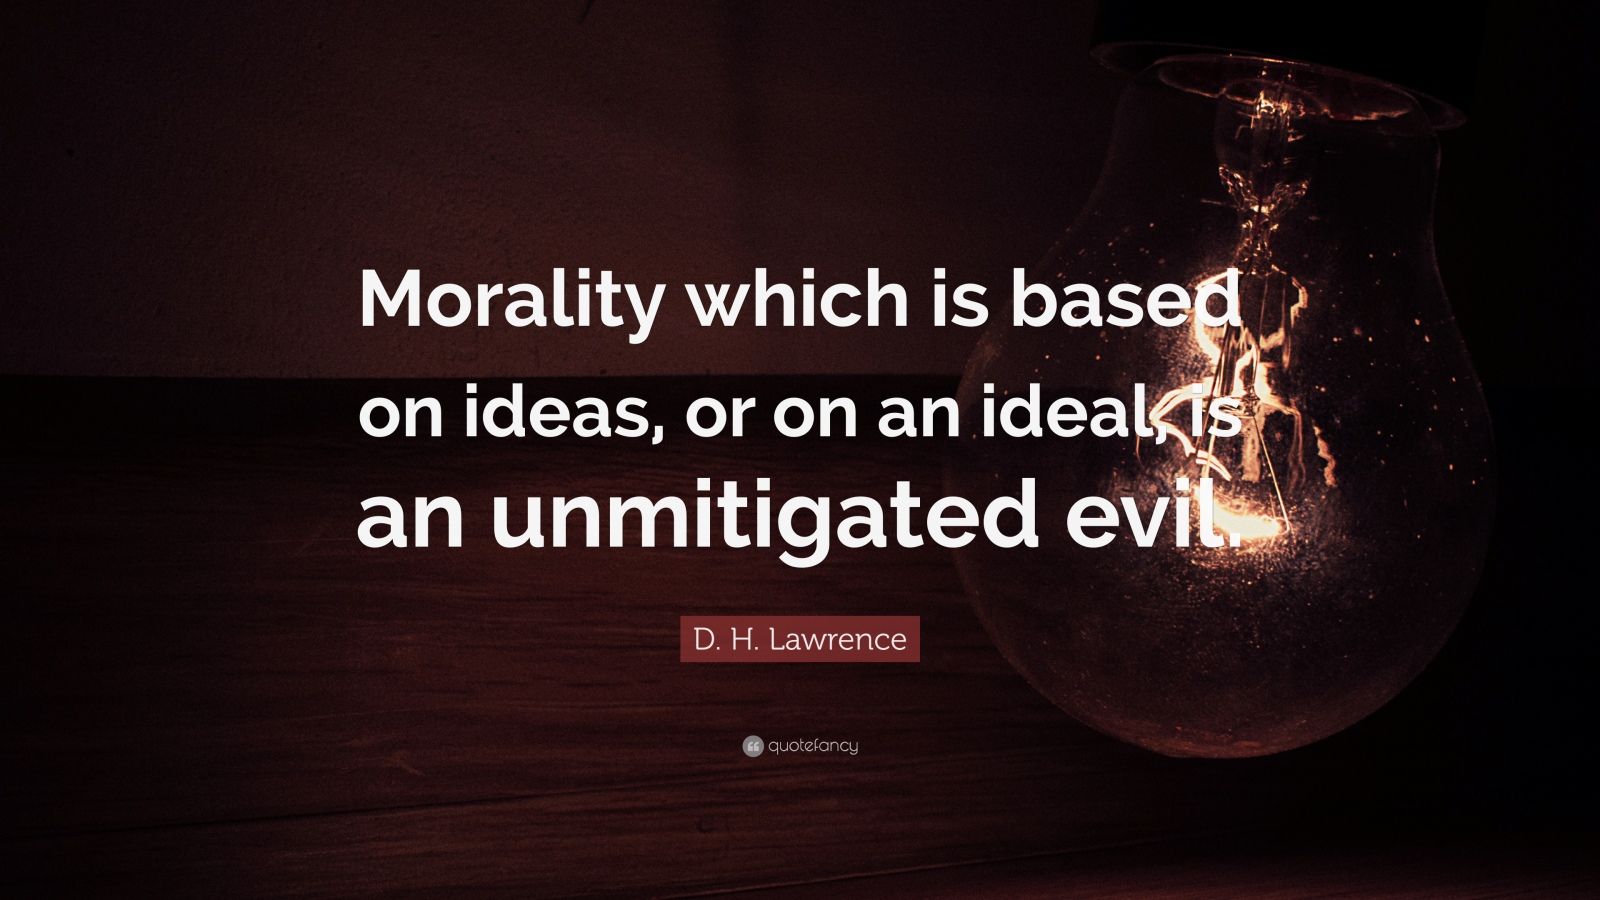 D. H. Lawrence Quote: “Morality which is based on ideas, or on an ideal